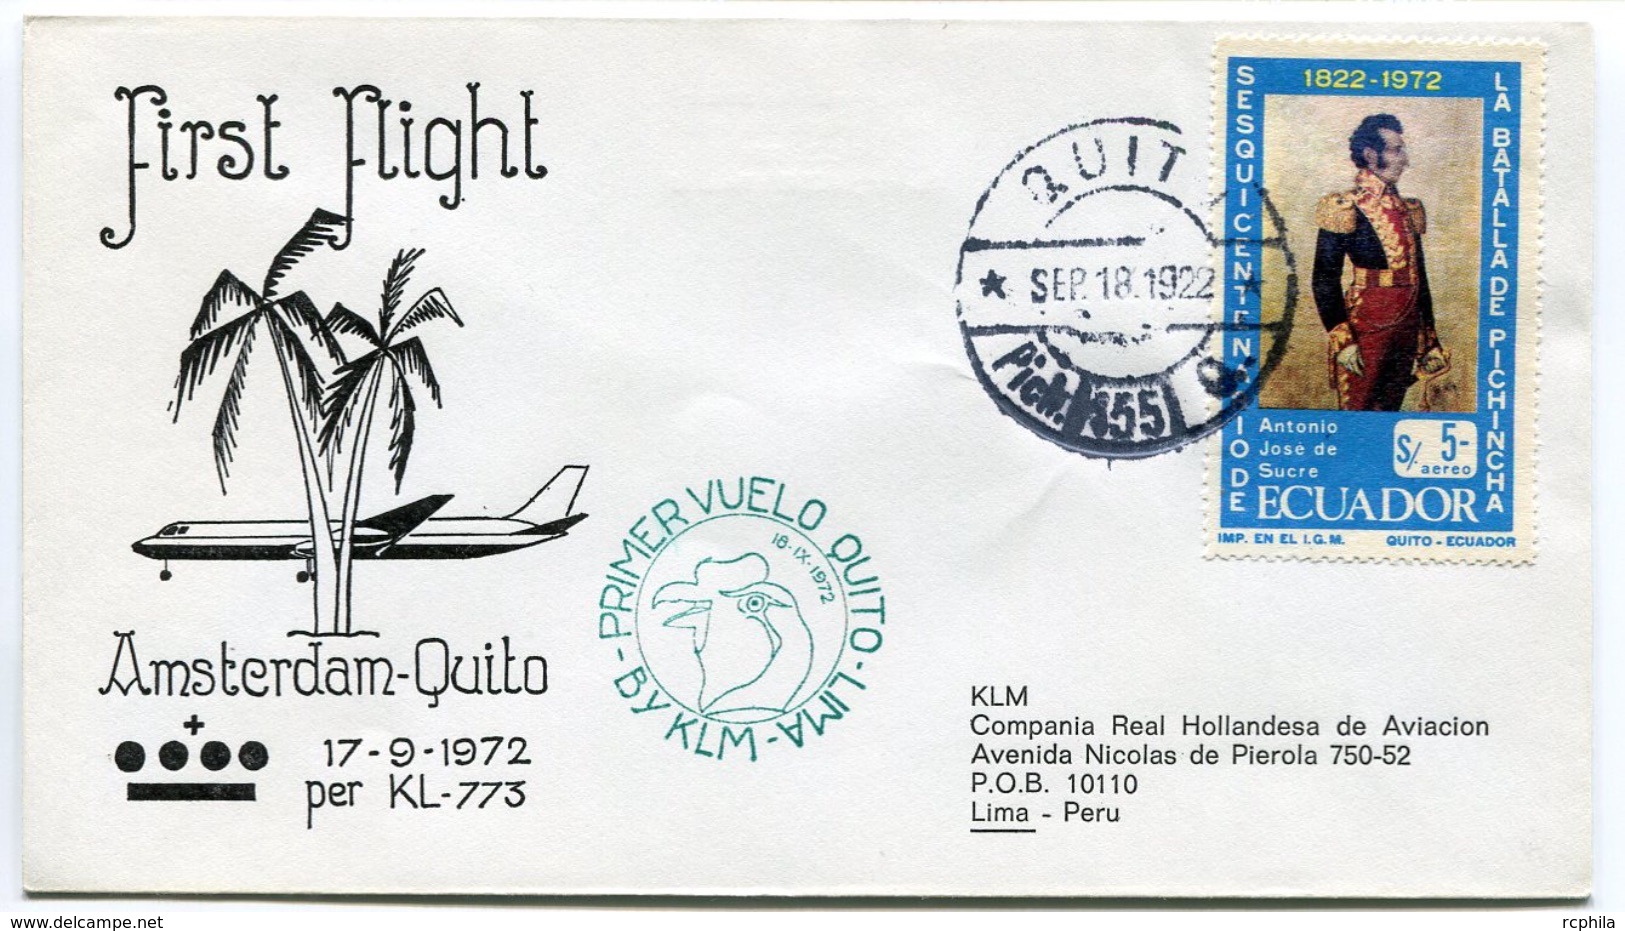 RC 6703 PAYS-BAS KLM 1972 1er VOL AMSTERDAM - QUITO EQUATEUR FFC NETHERLANDS LETTRE COVER - Luchtpost